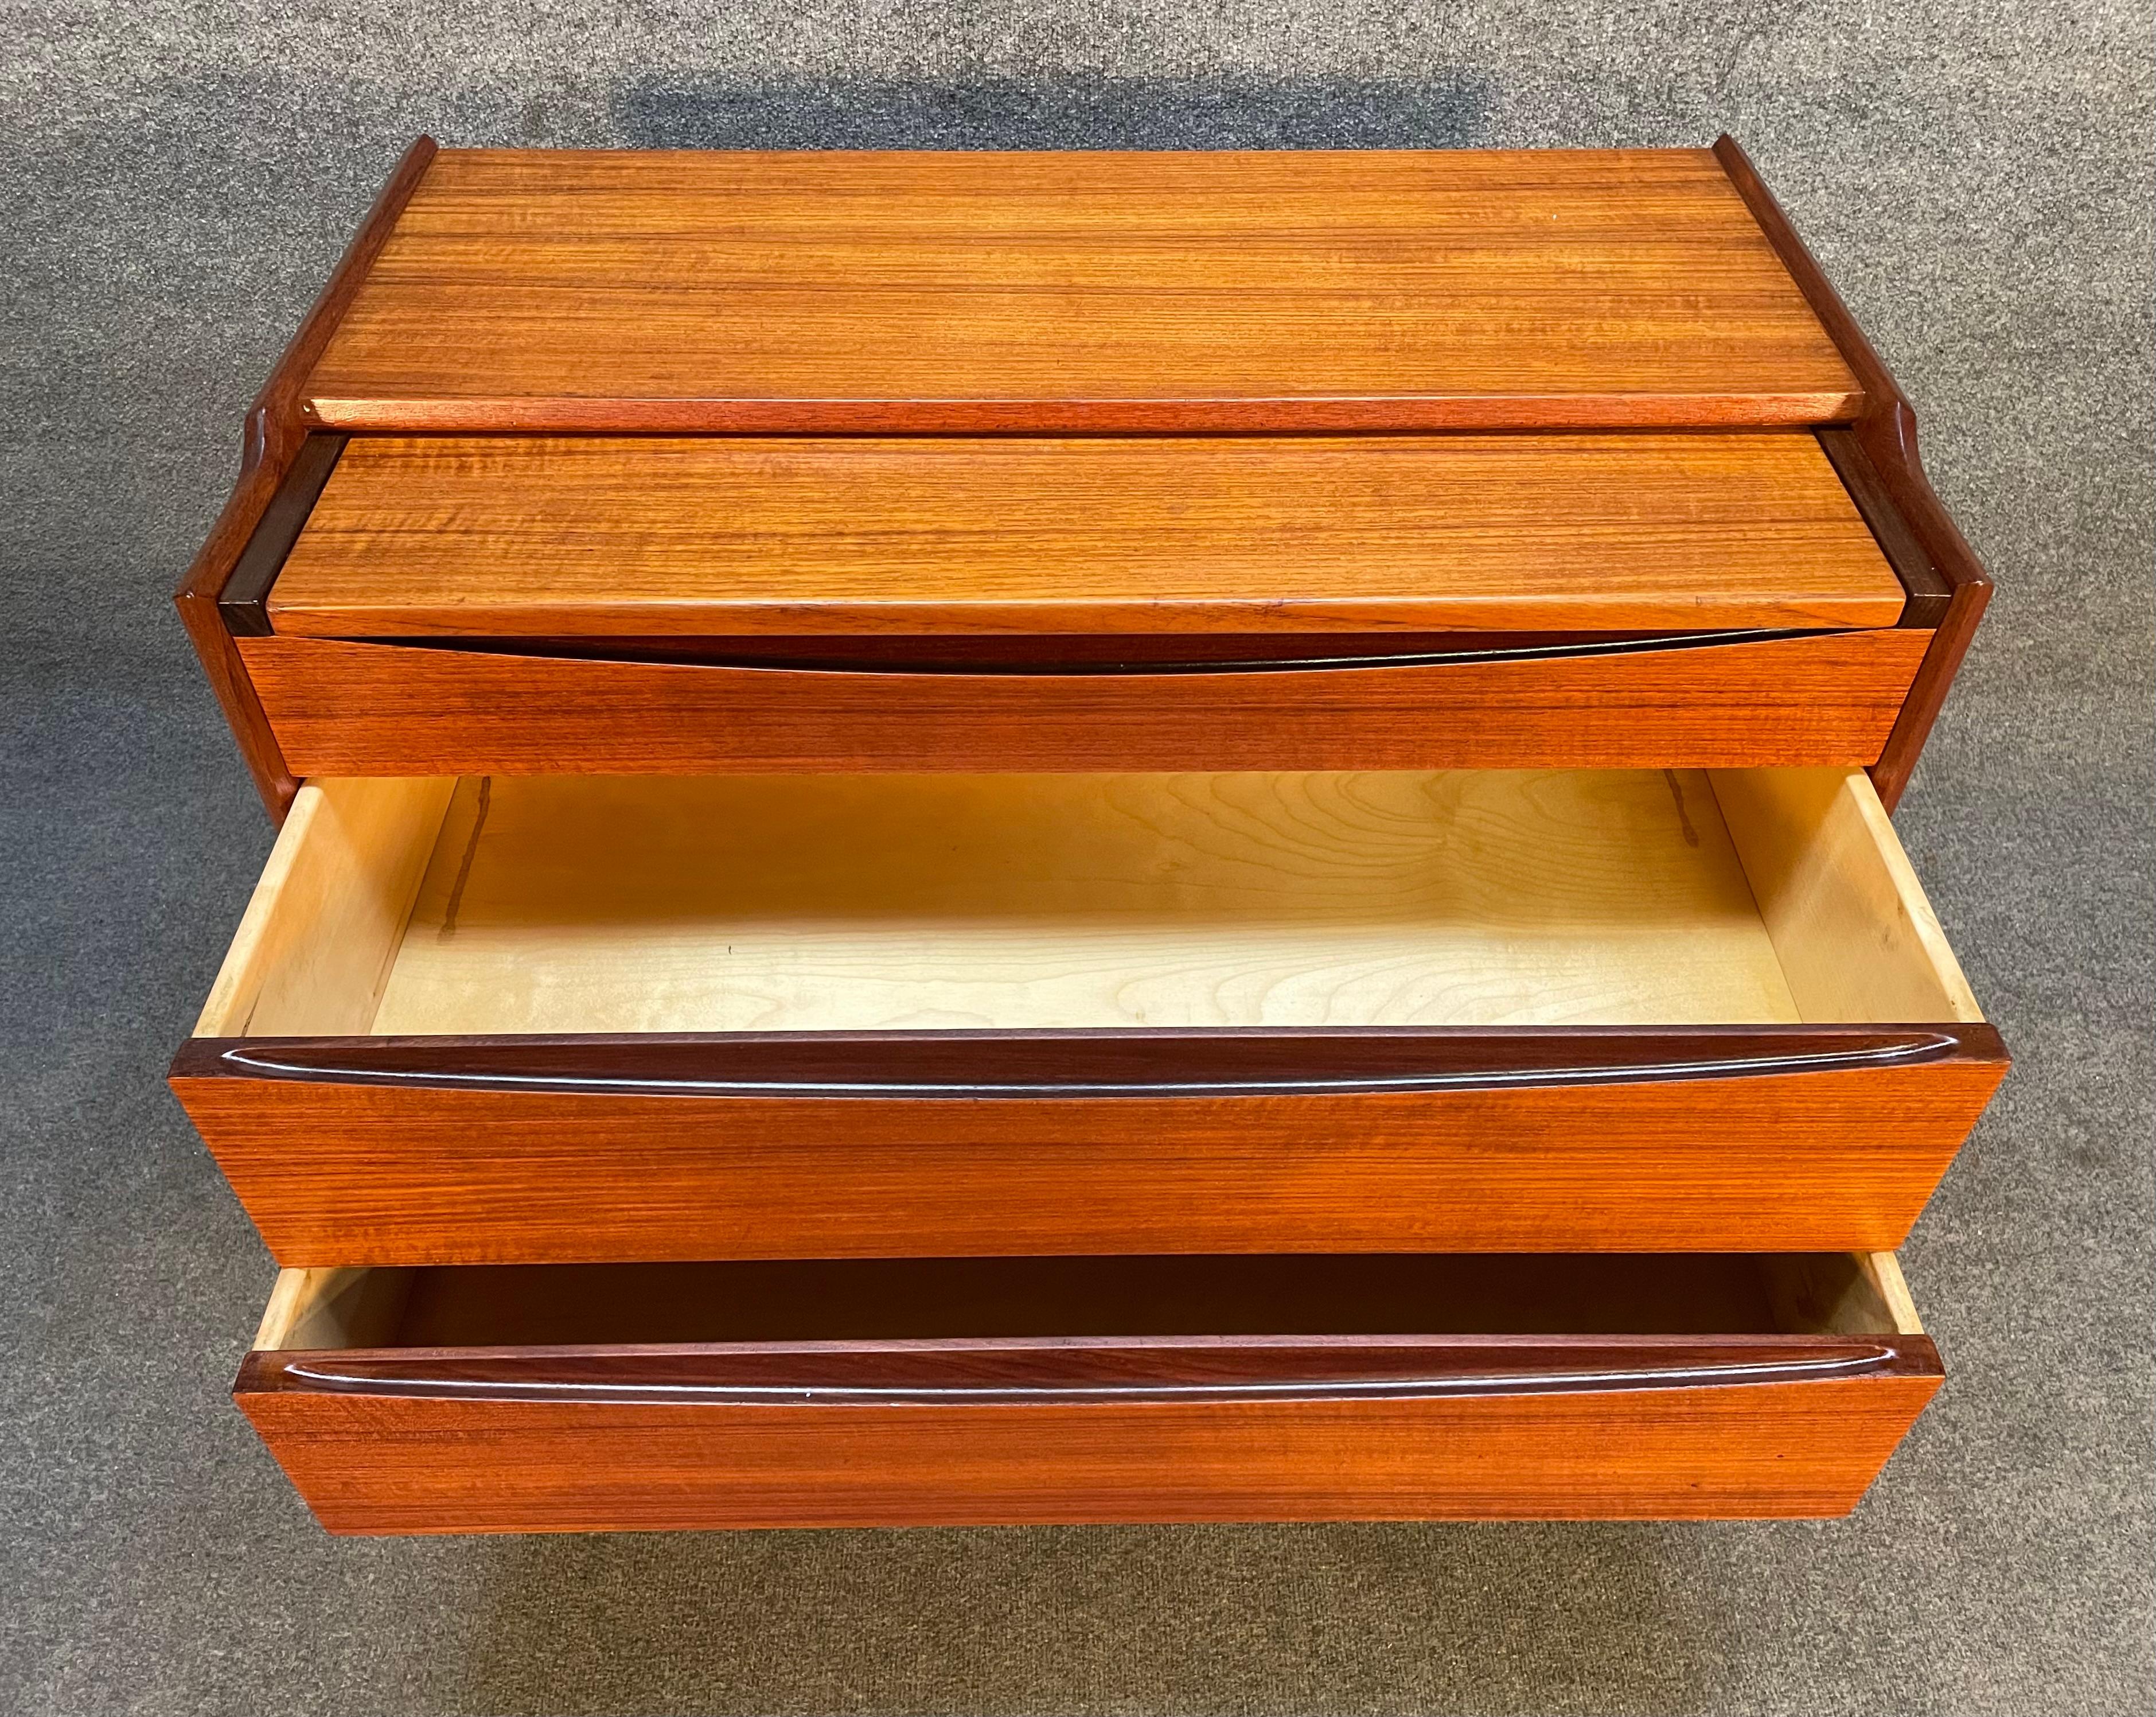 Here is beautiful Scandinavian modern chest of drawers - dressing table in teak manufactured in Denmark in the 1960's.
This exquisite case piece, recently imported from Europe to California before its refinishing, features a vibrant wood grain, a